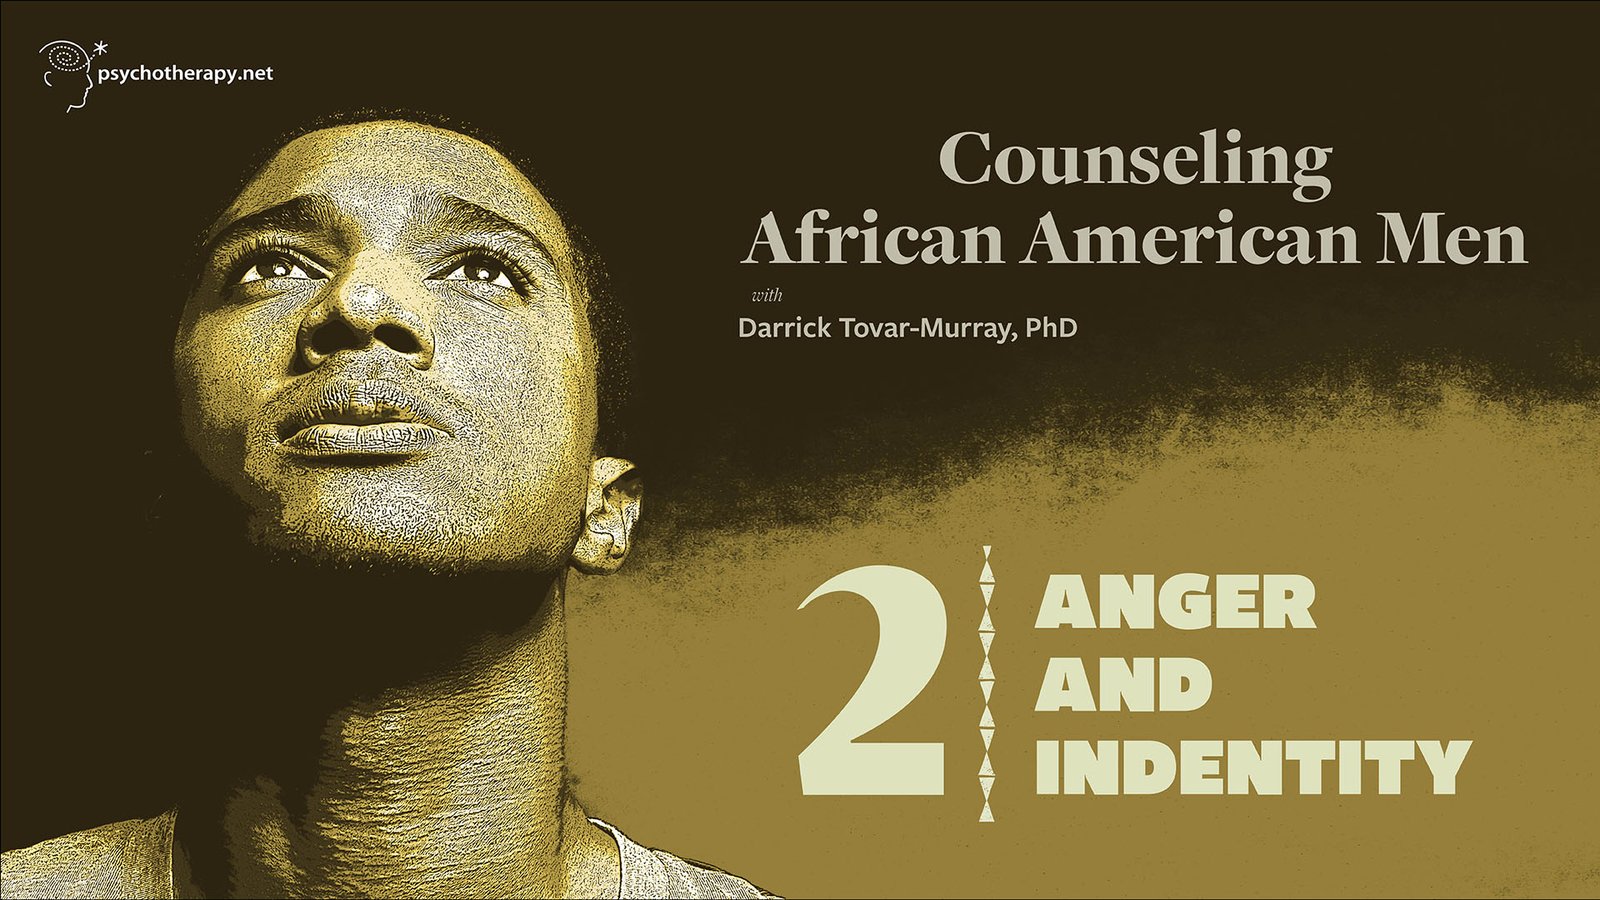 Counseling African American Men, Volume 2: Anger and Identity